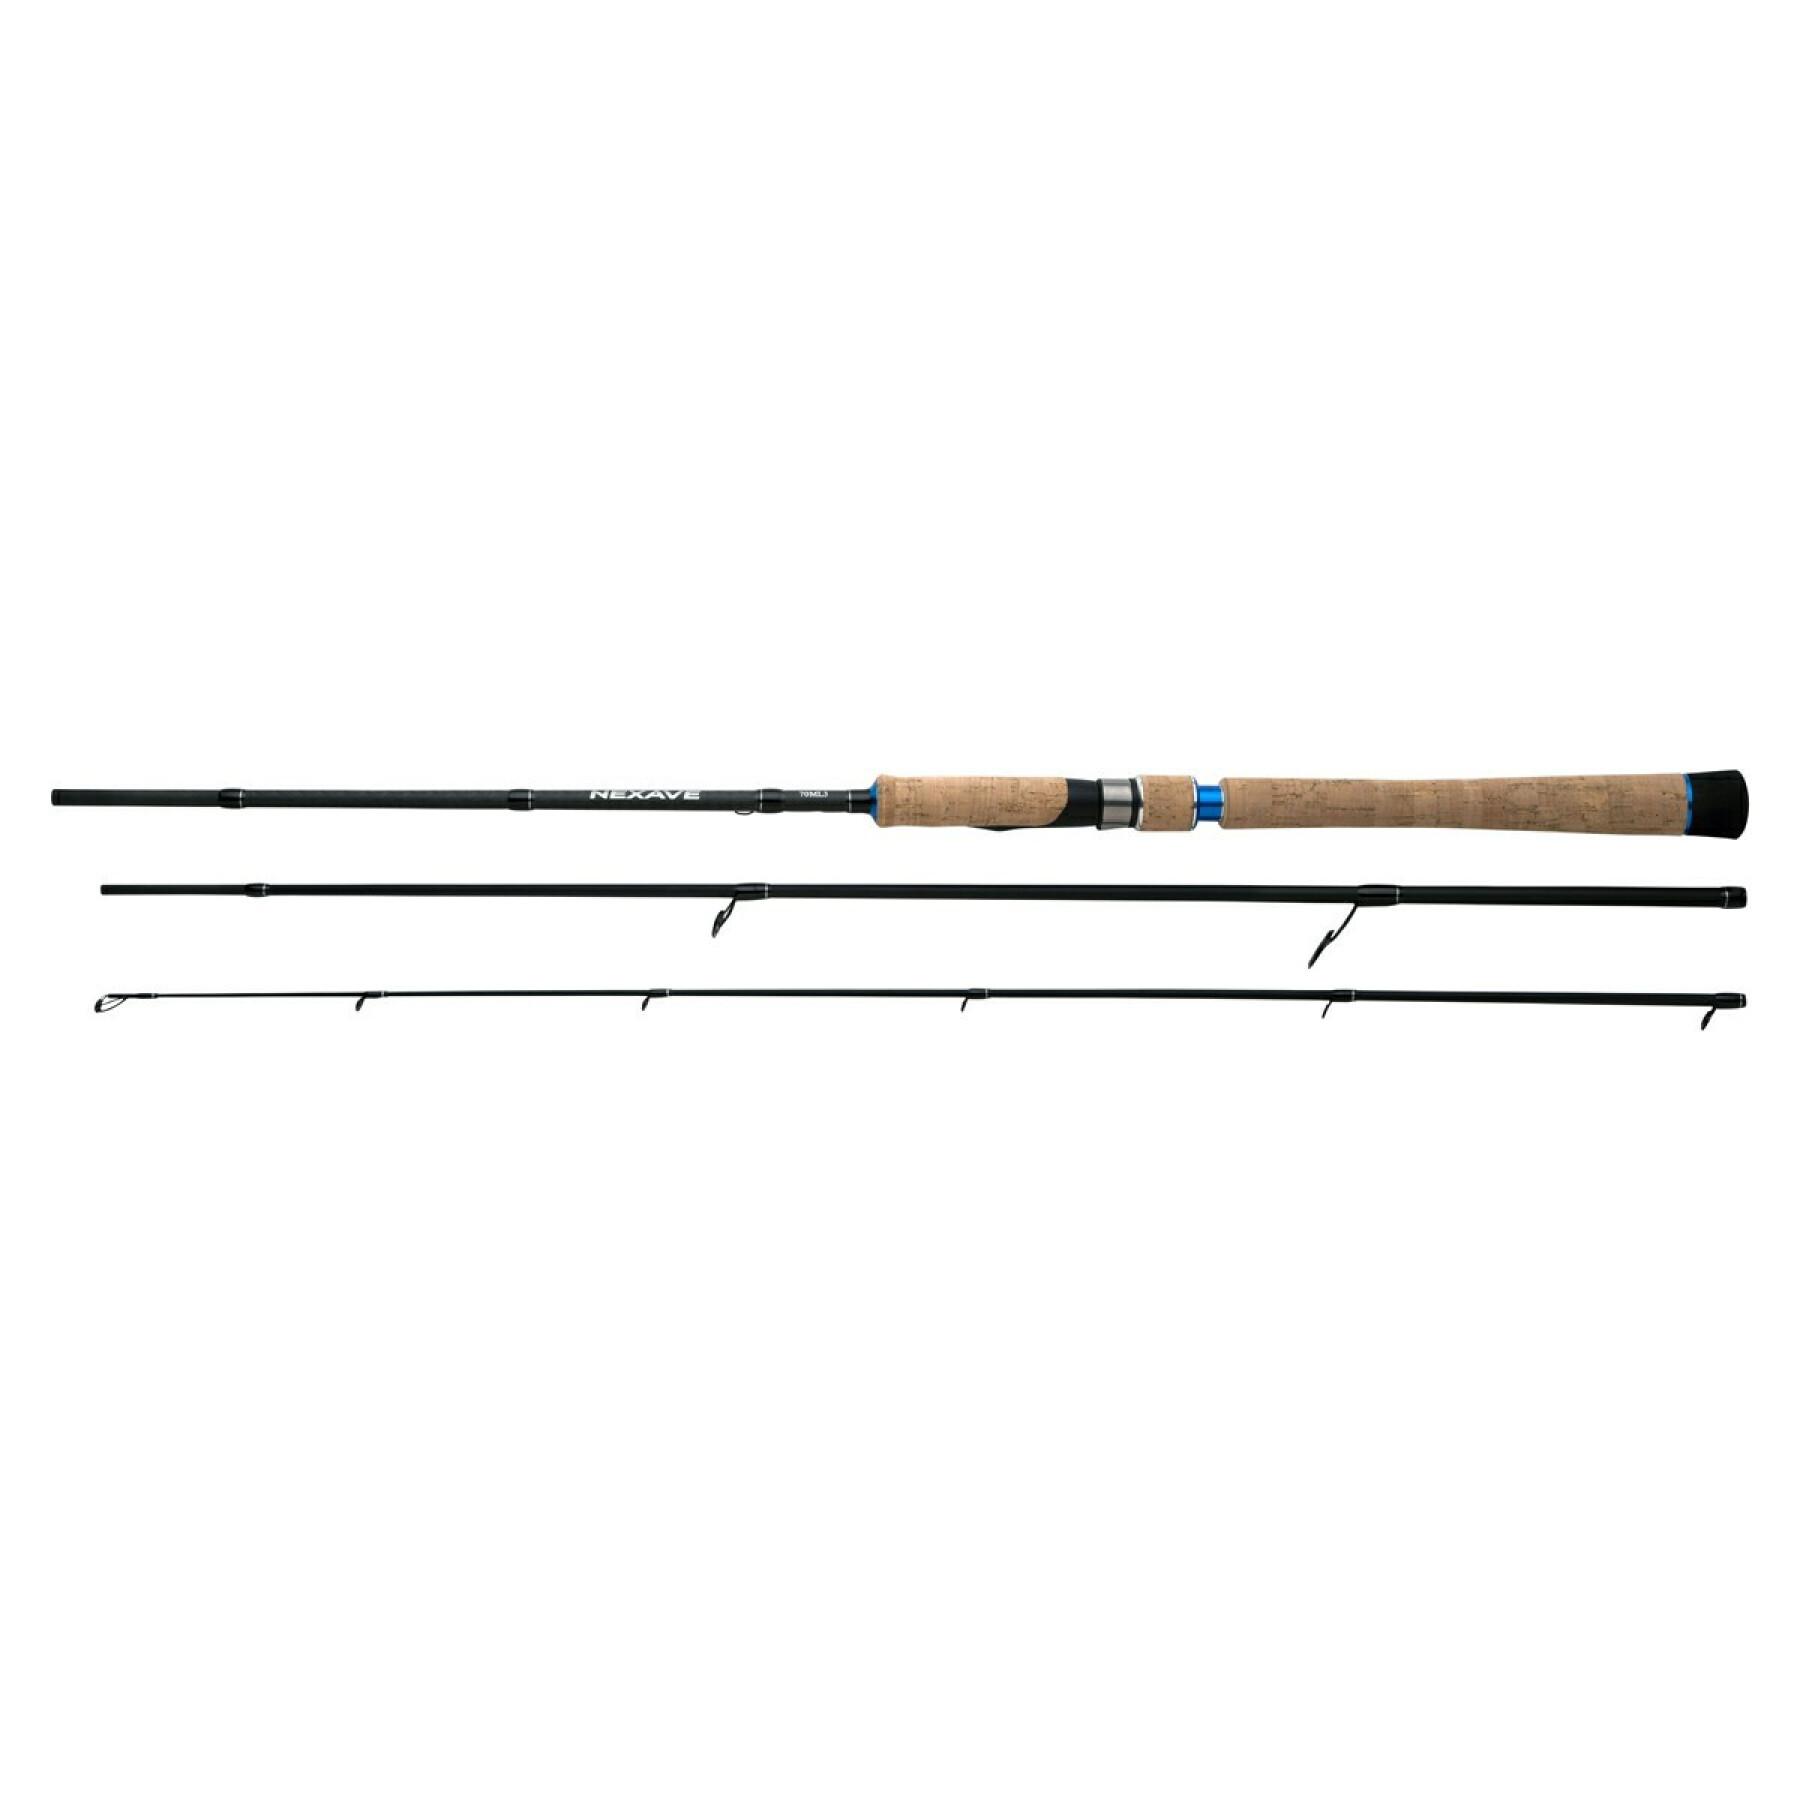 Canne spinning Shimano Nexave Mod-Fast 6'0'' 3-14g